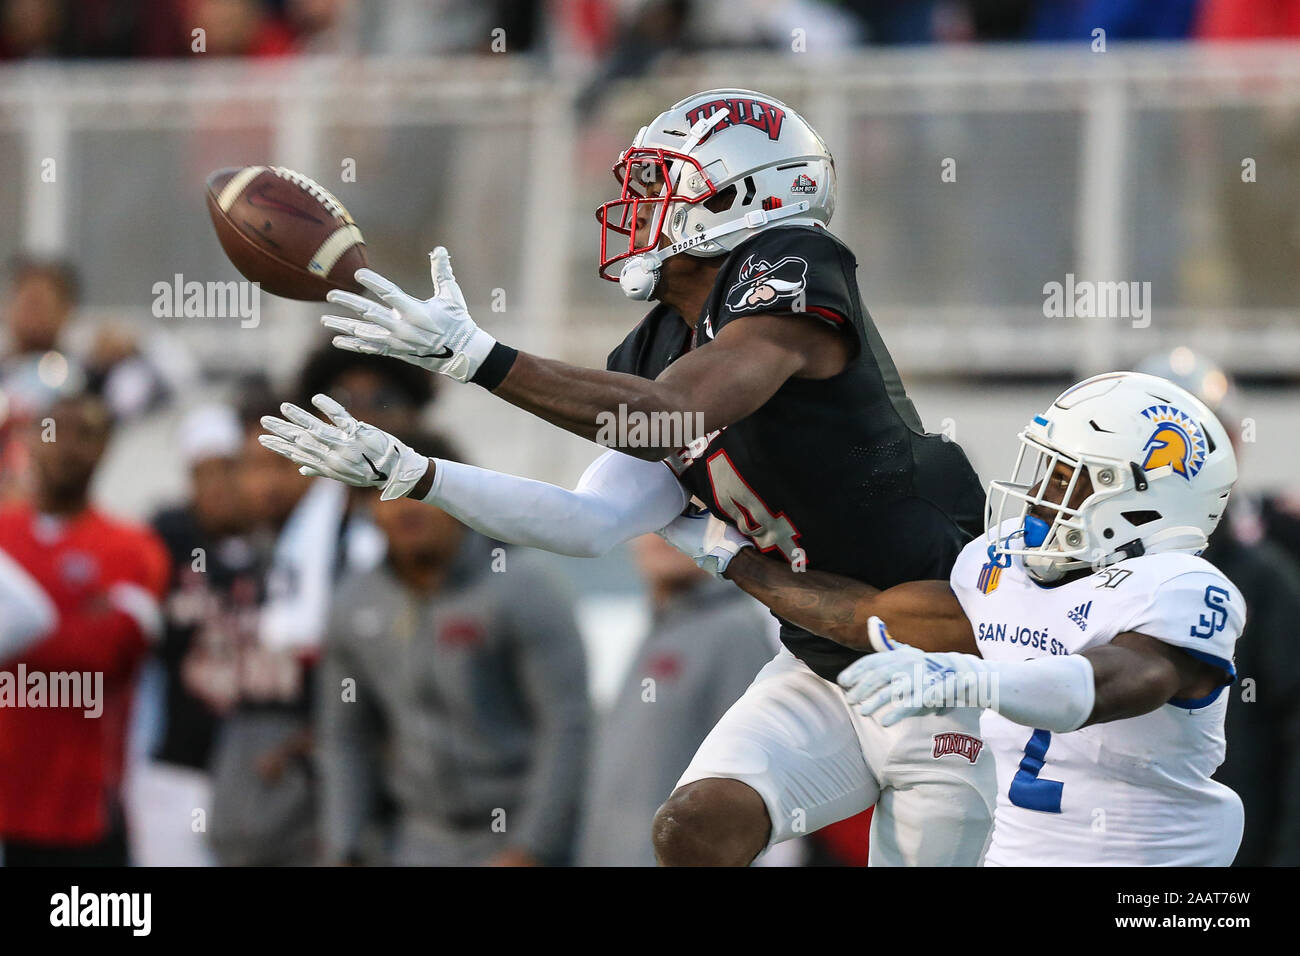 Las Vegas, NV, USA. 23rd Nov, 2019. UNLV Rebels wide receiver Randal Grimes (4) catches the football in front of San Jose State Spartans cornerback Zamore Zigler (2) during the NCAA Football game featuring the San Jose State Spartans and the UNLV Rebels at Sam Boyd Stadium in Las Vegas, NV. The UNLV Rebels defeated the San Jose State Spartans 38 to 35. Christopher Trim/CSM/Alamy Live News Stock Photo